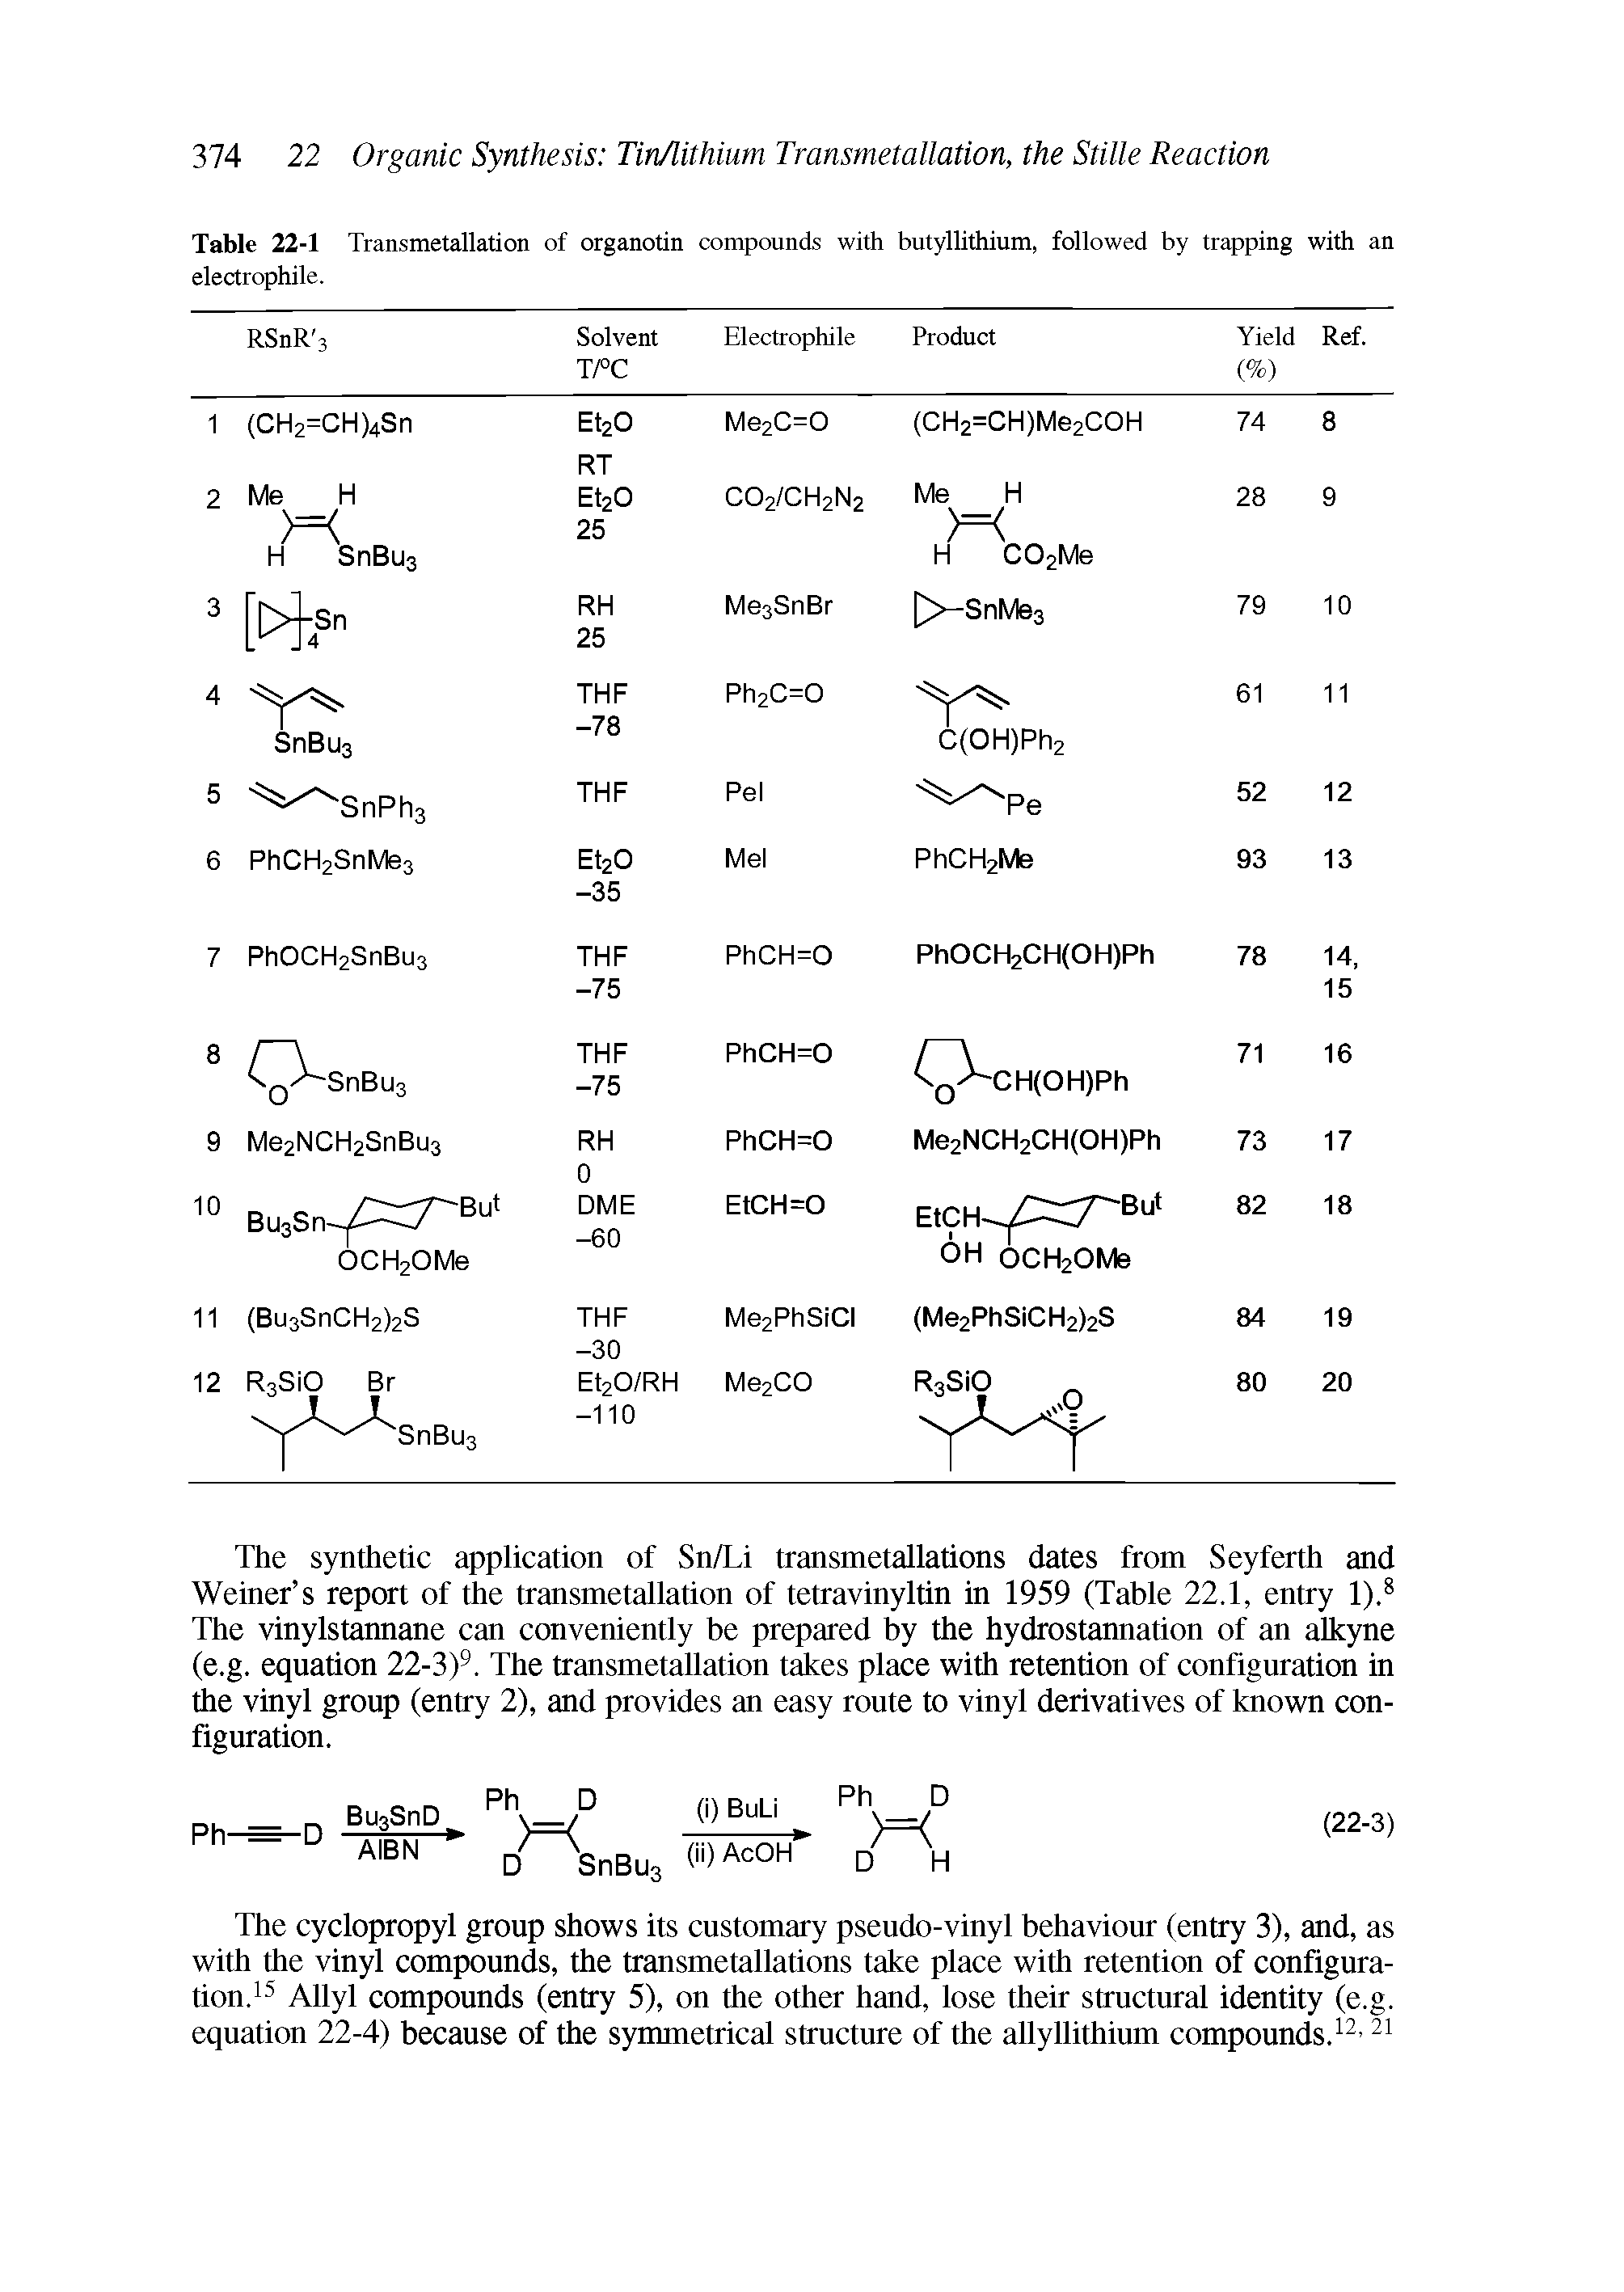 Table 22-1 Transmetallation of organotin compounds with butyllithium, followed by trapping with an electrophile.